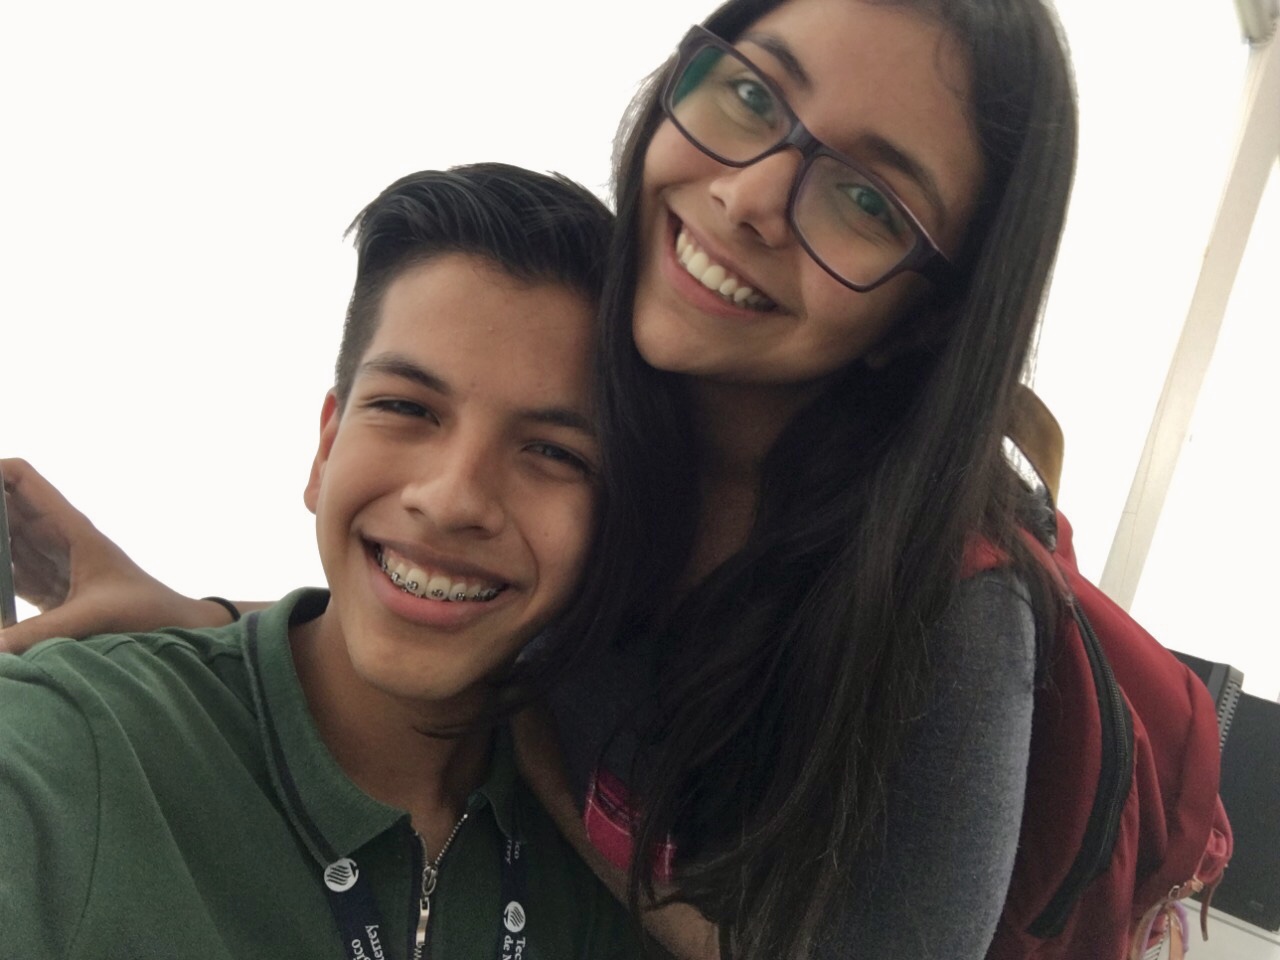 boy and girl wearing red backpack smile while taking a selfie